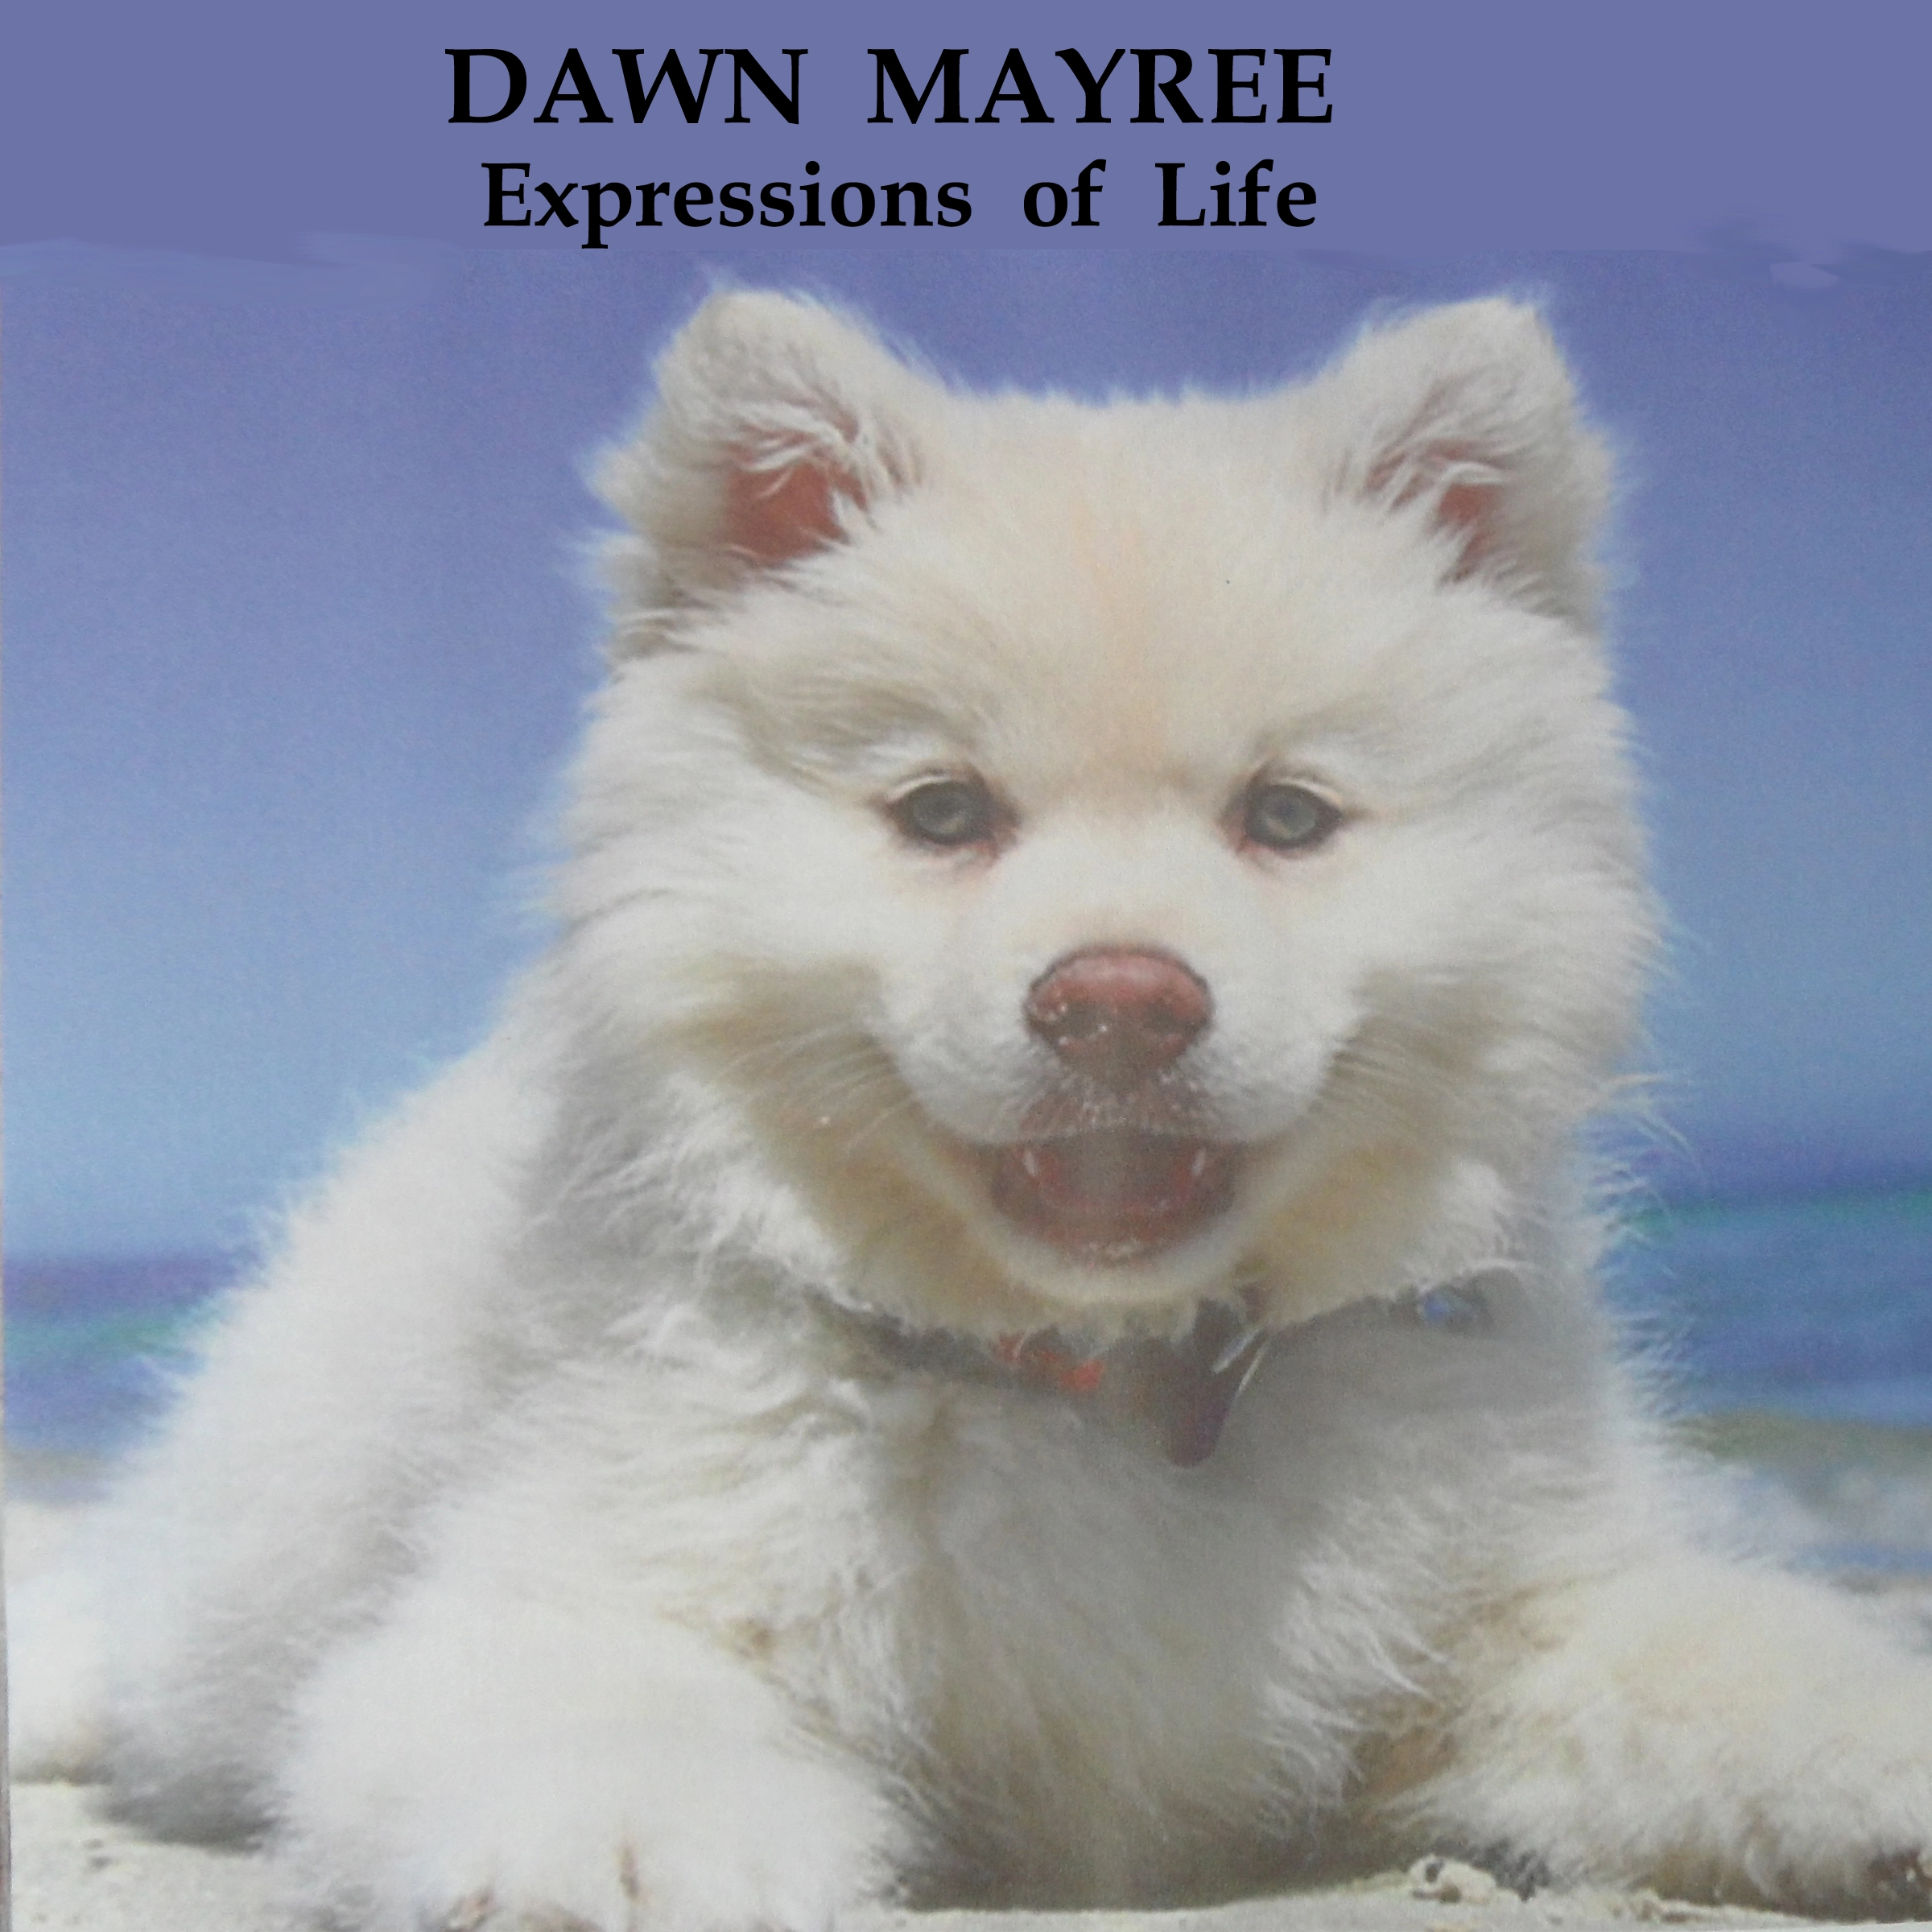 Expressions of Life Audiobook by Dawn Mayree